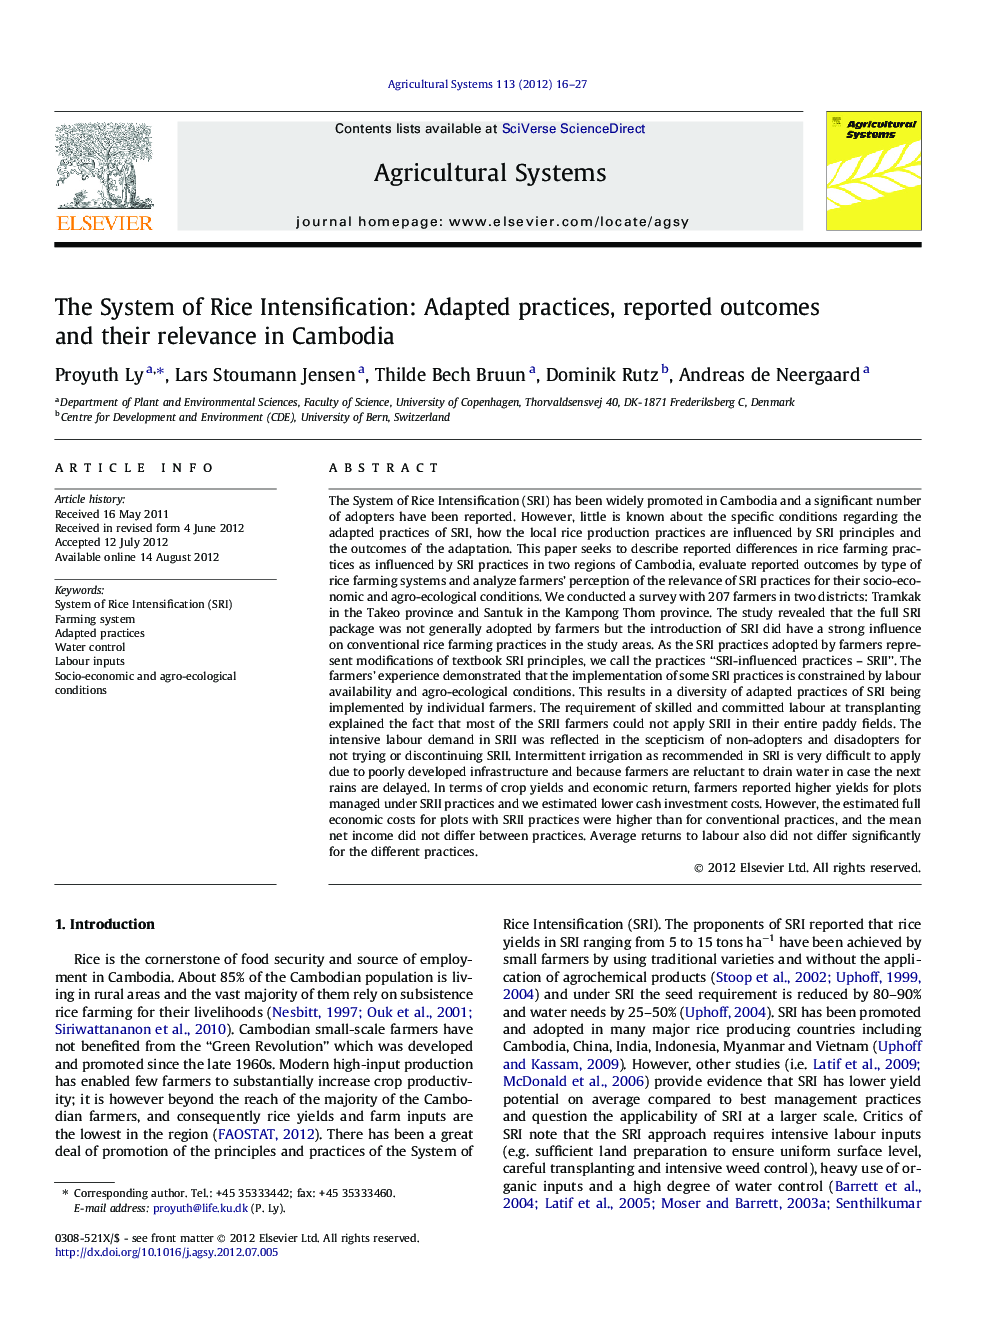 The System of Rice Intensification: Adapted practices, reported outcomes and their relevance in Cambodia